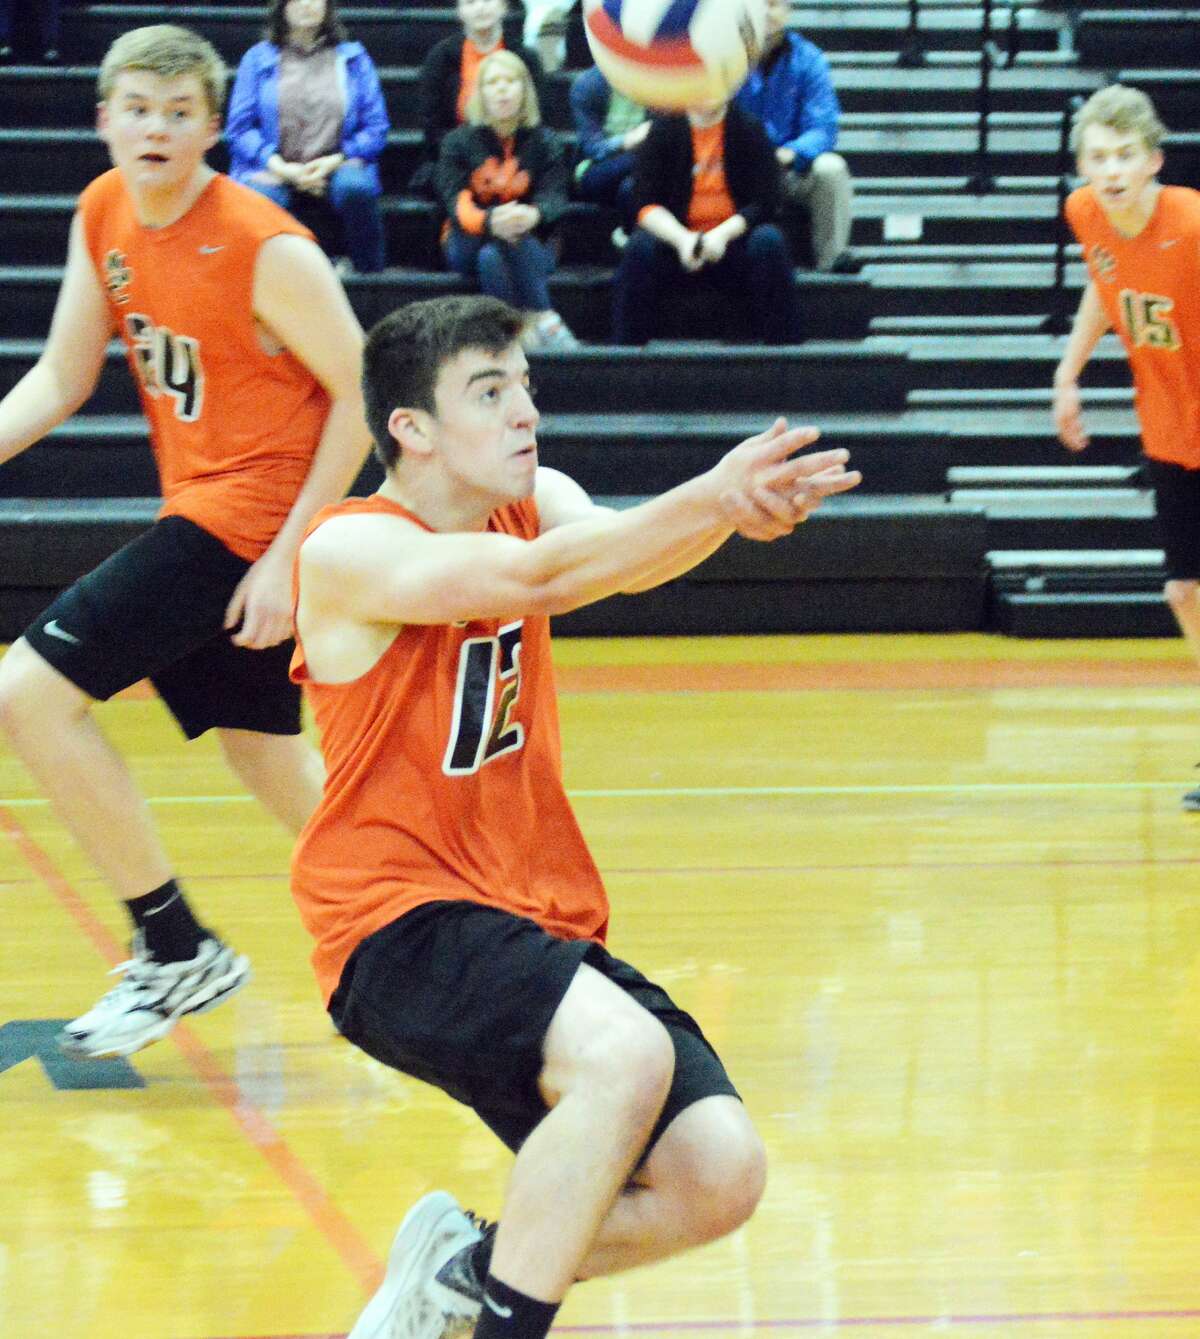 Edwardsville setter Ben Lombardi saves a ball during first-game action against the Granite City Warriors at Lincoln Middle School